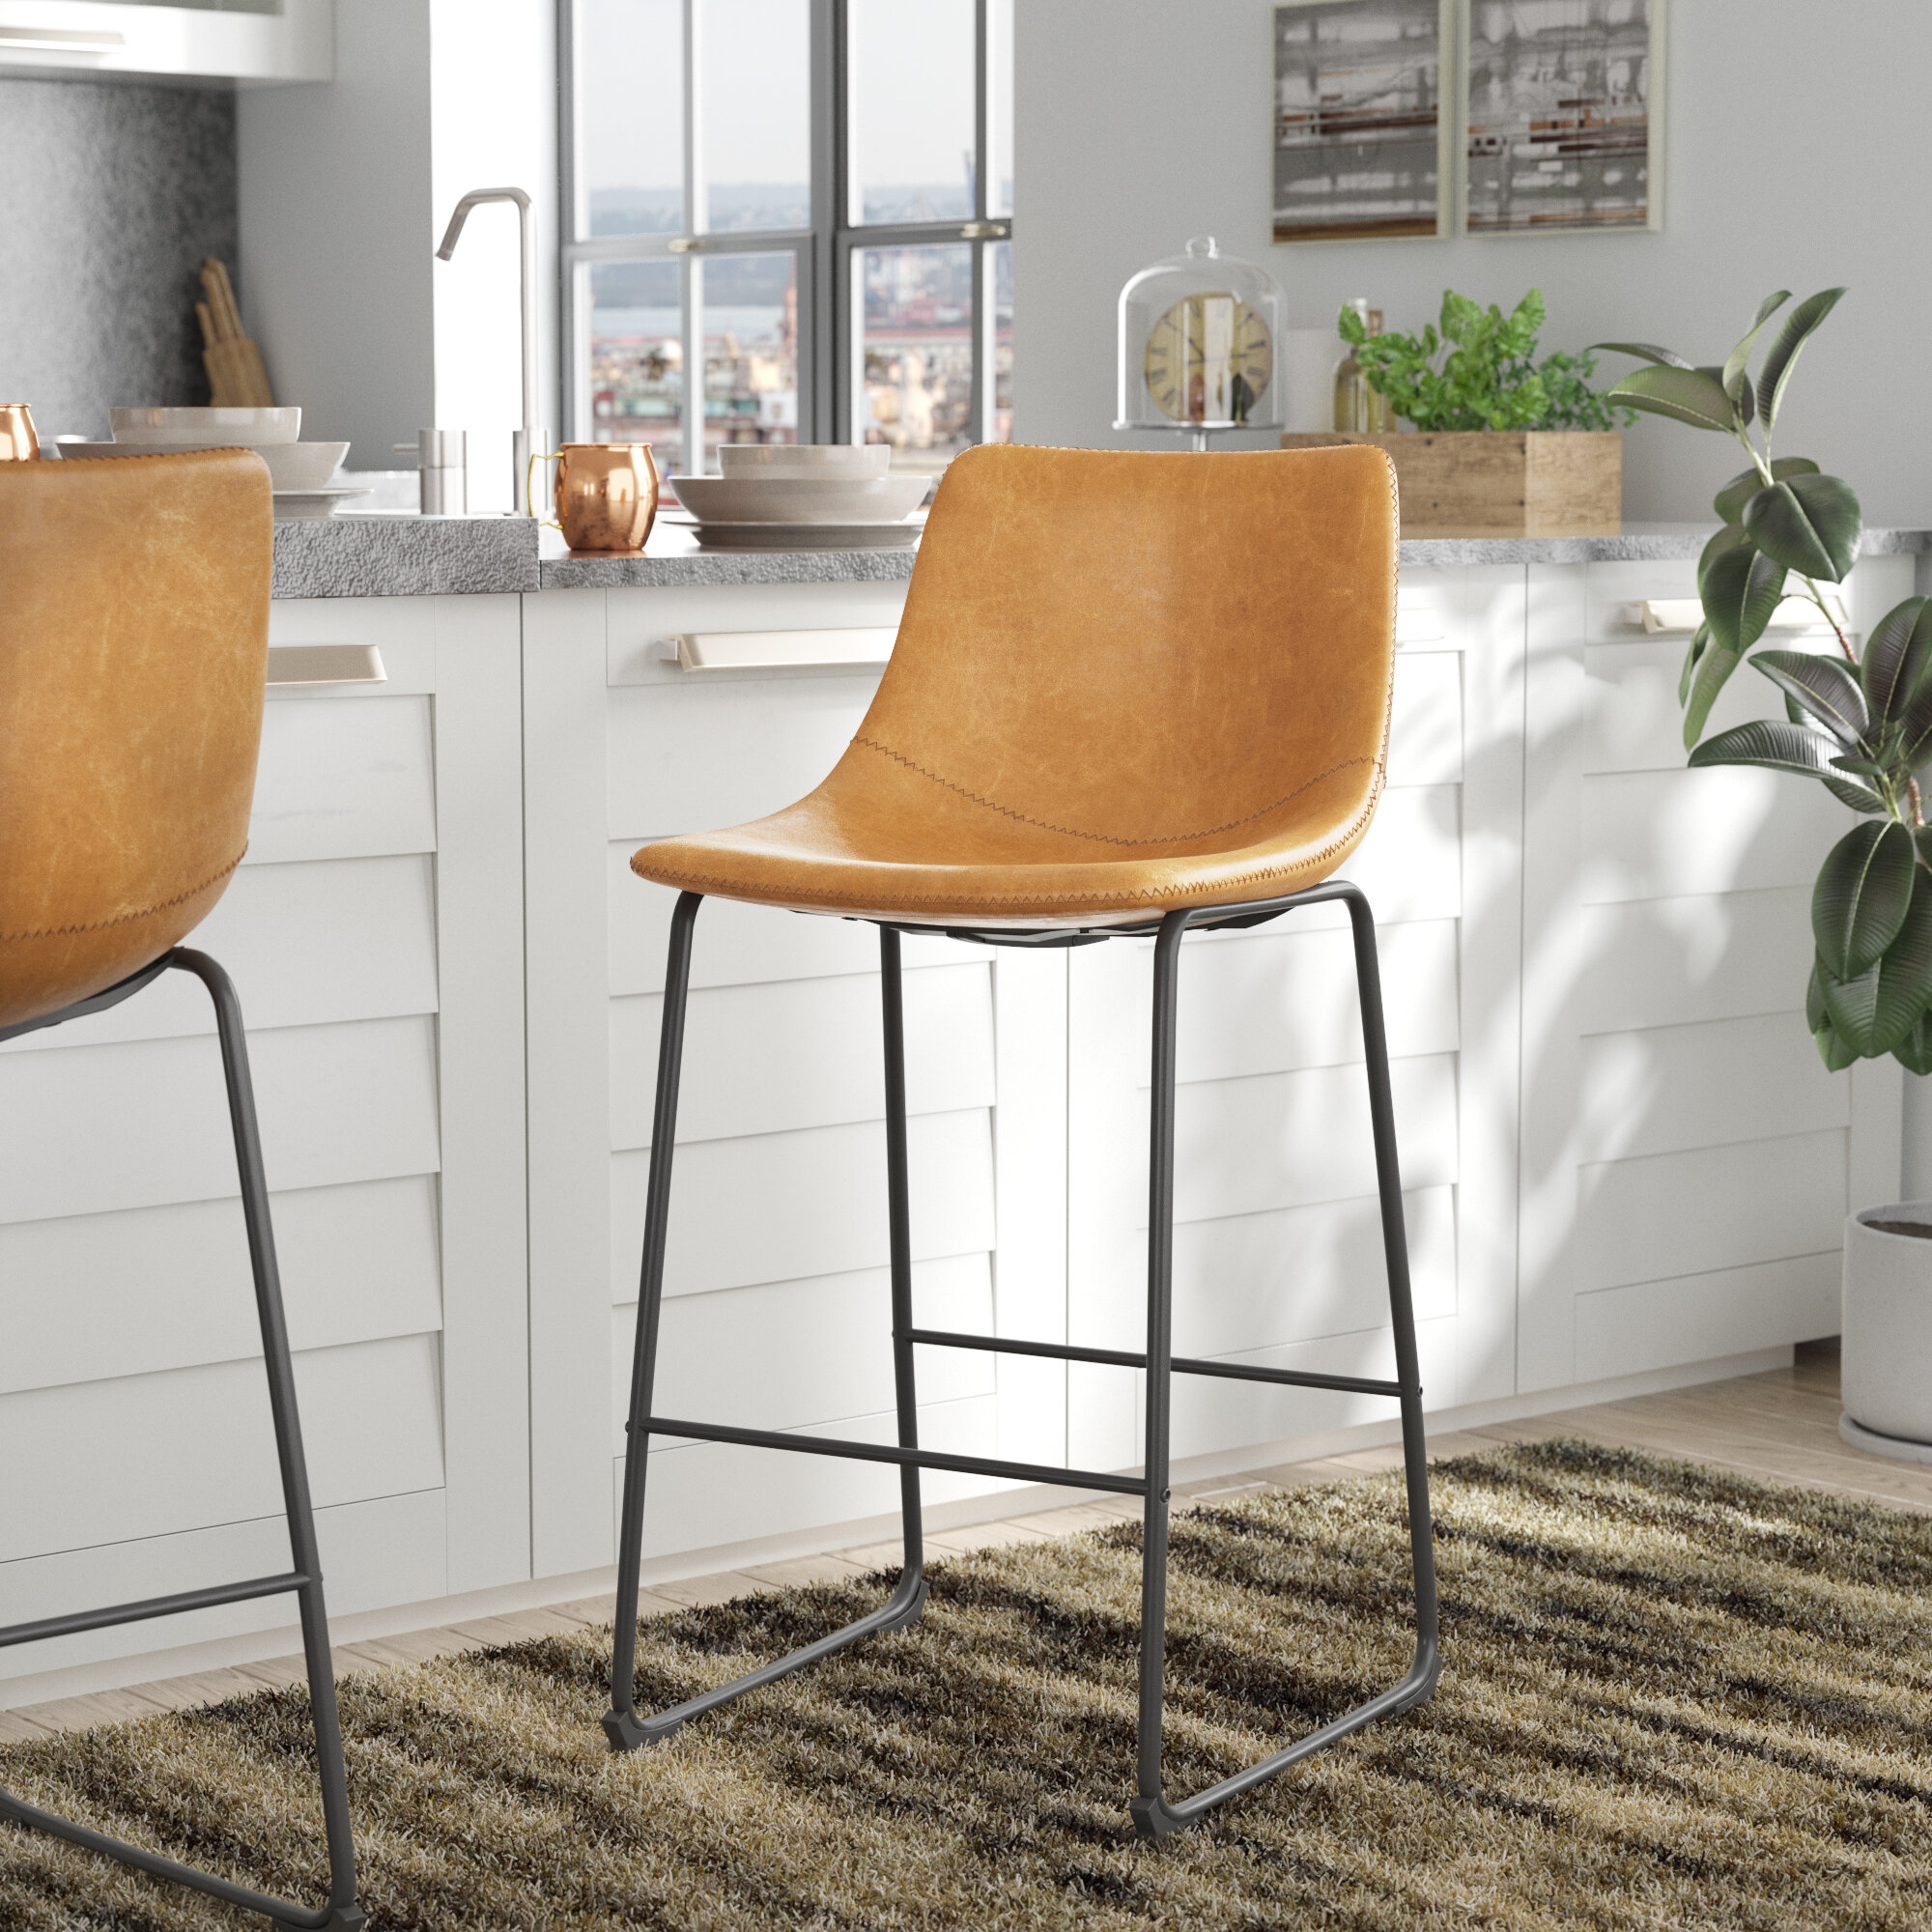 Gray ICOCO Modern Bar Stools Set of 2 with Backrest and Footrest,Breakfast Kitchen Bar Stool Chairs Adjustable Swivel Gas Lift,Pub Barstools with Leatherette Exterior